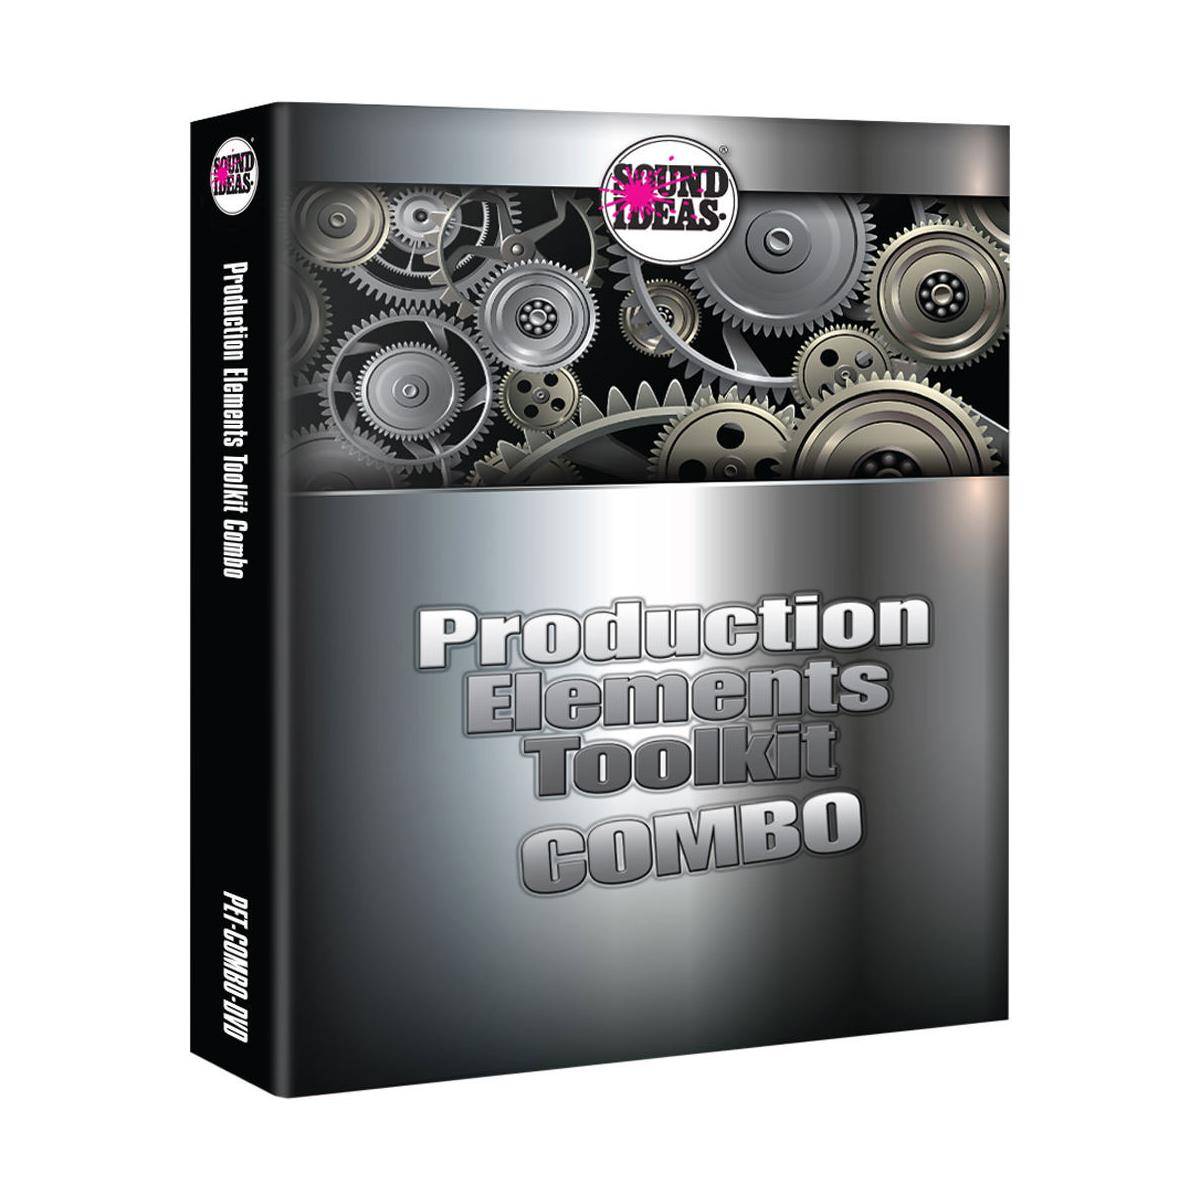 Image of Sound Ideas Production Elements Toolkit Combo on DVD